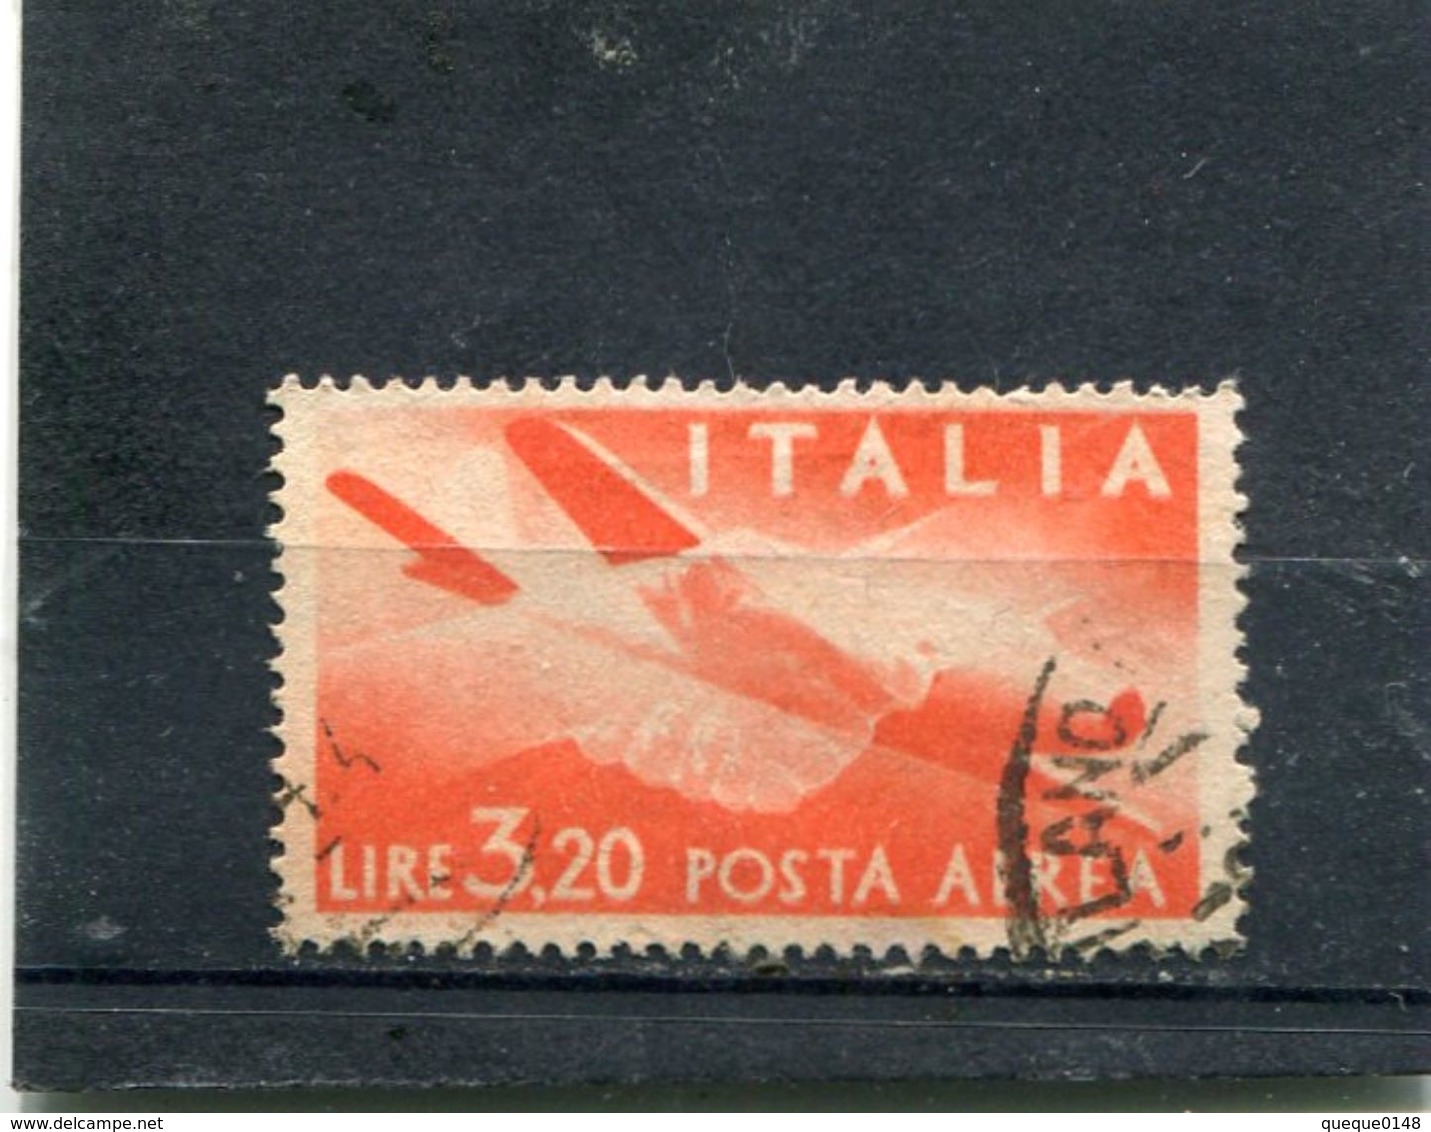 ITALY. 1945. SCOTT C108. PLANE AND CLASPED HANDS - Poste Aérienne